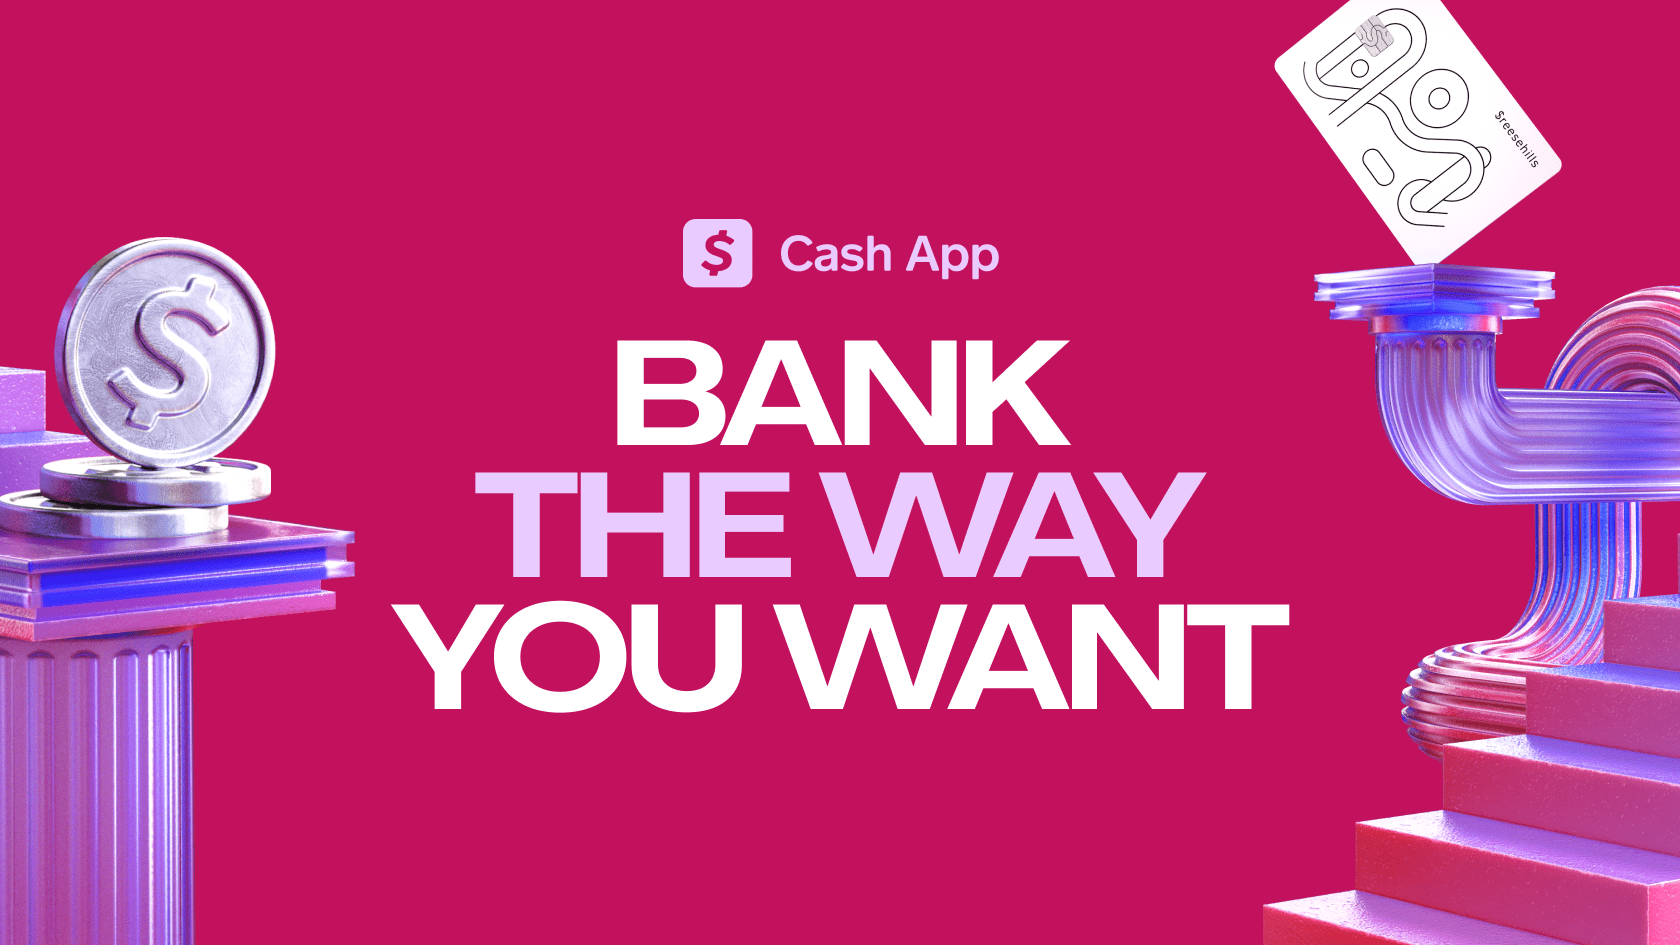 Cash App - A faster, simpler way to bank